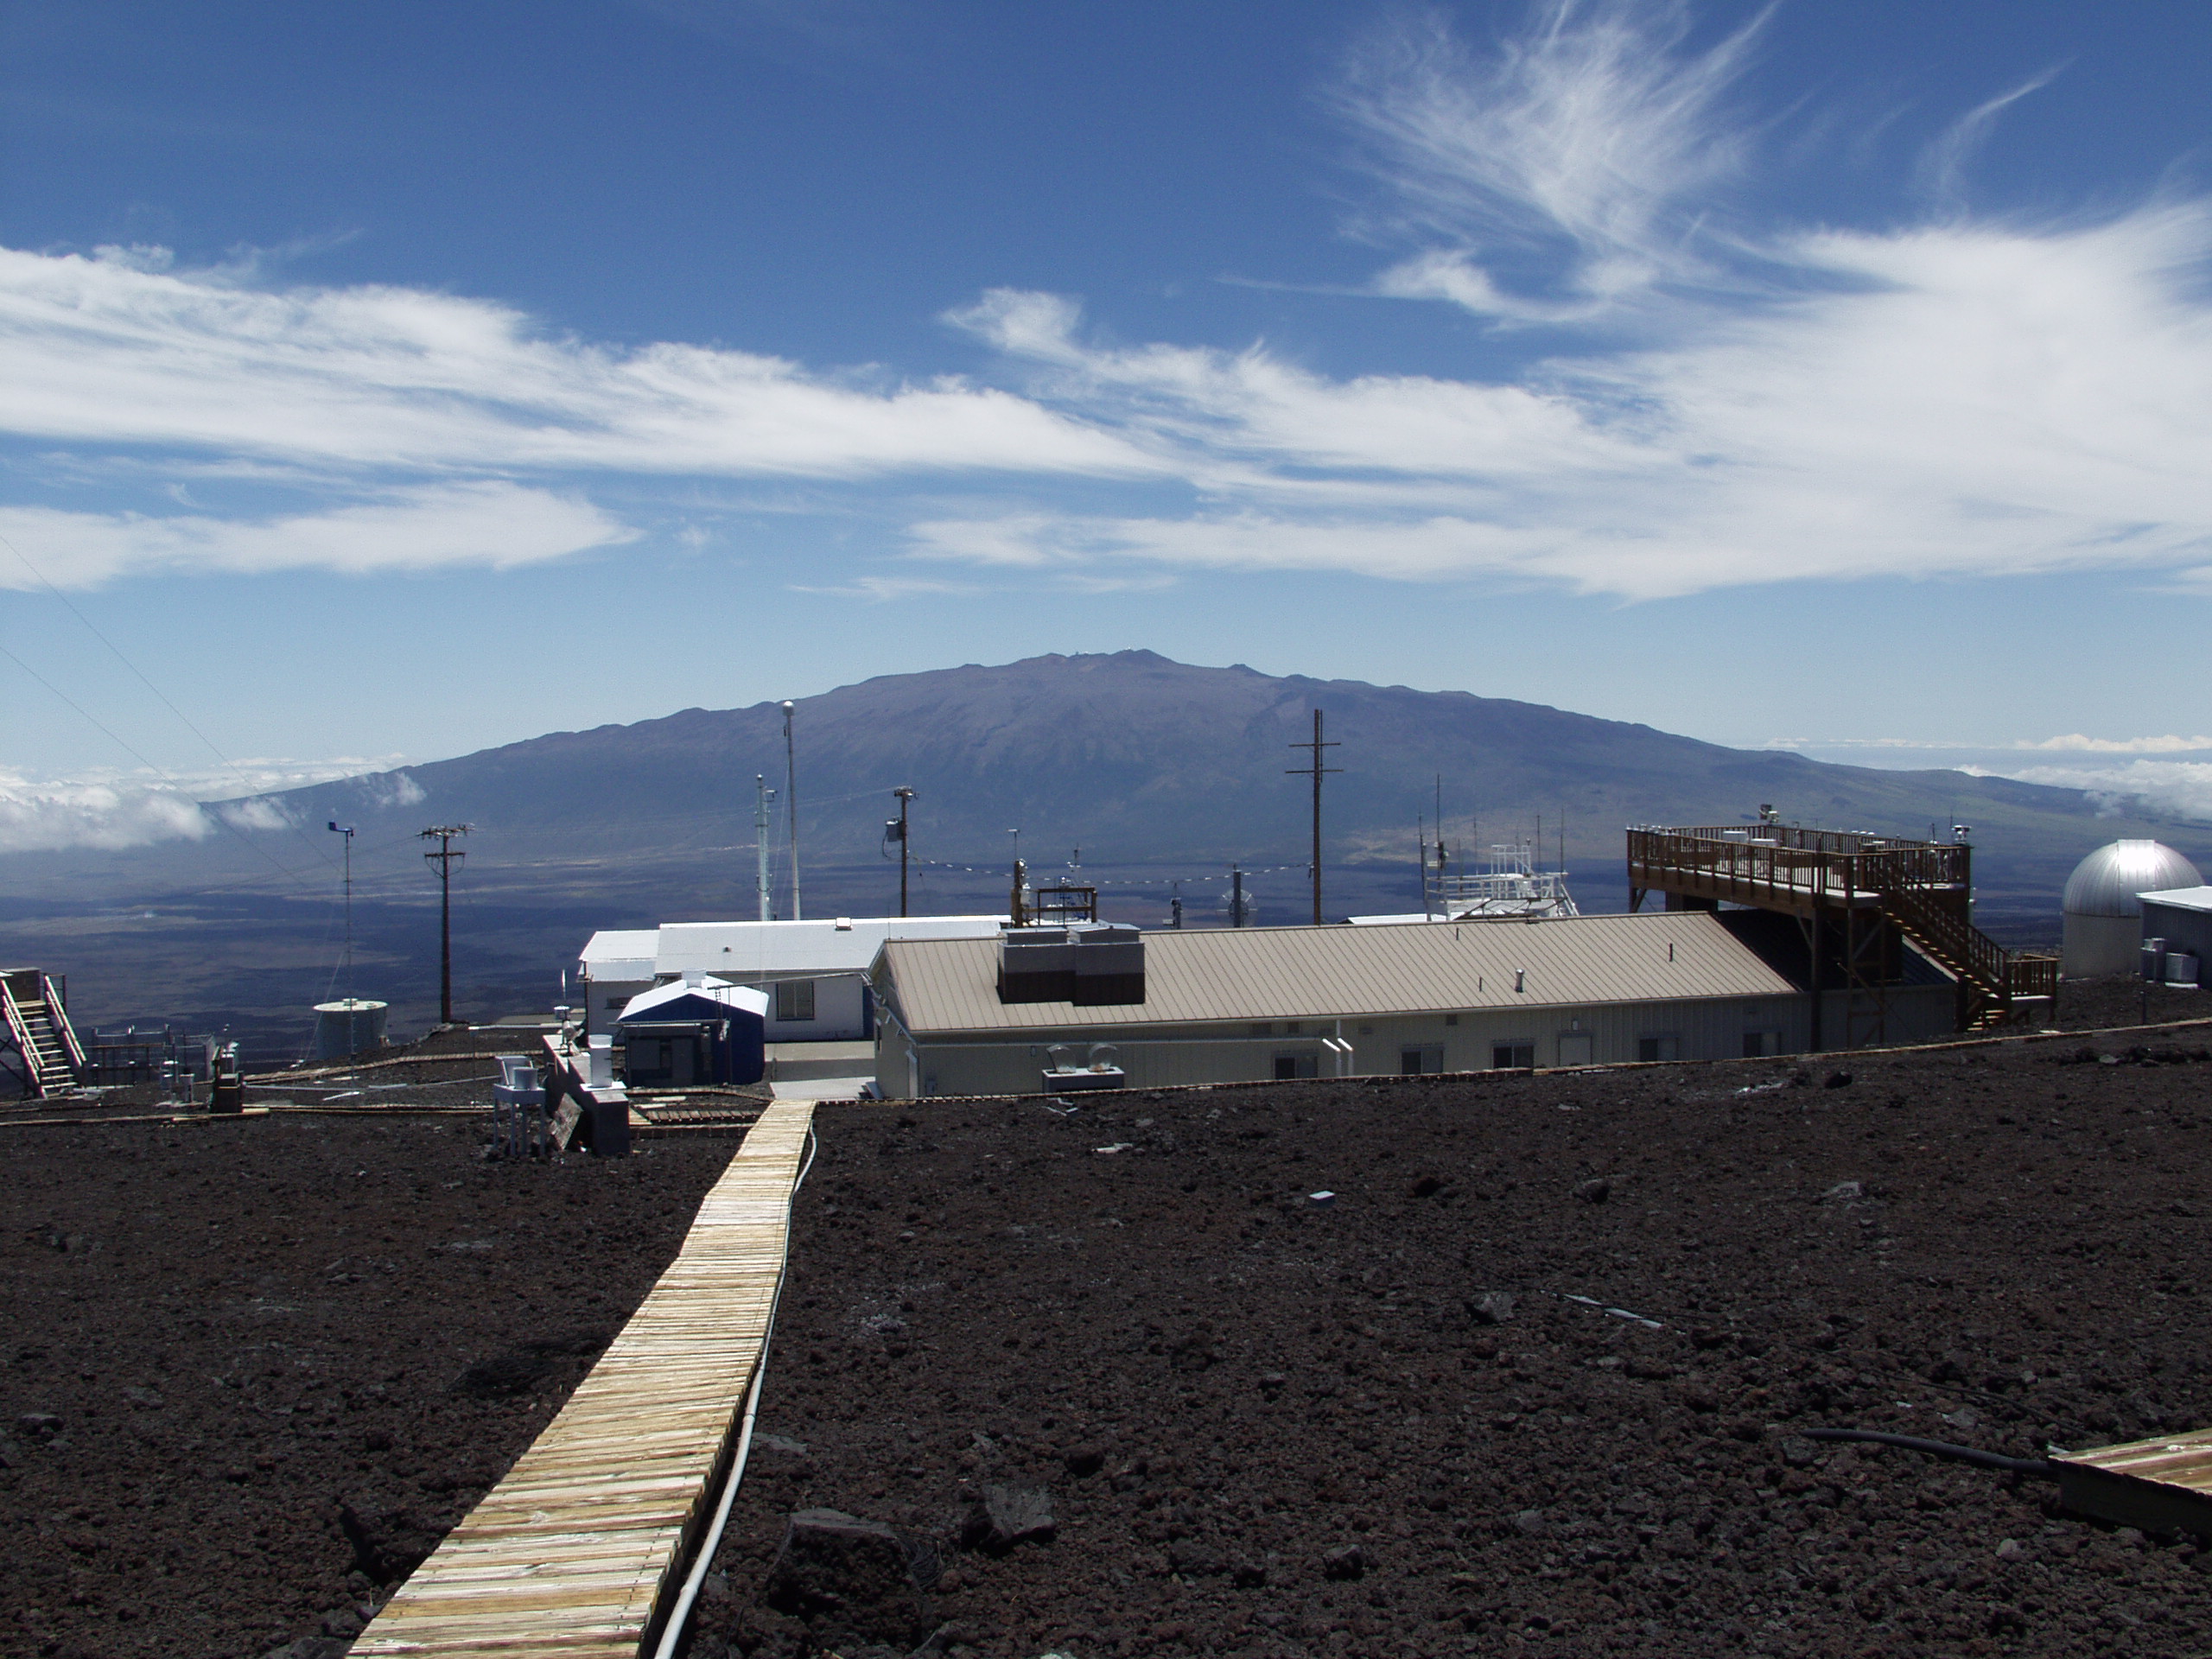 The Mauna Loa Observatory, a building in front of a mountain